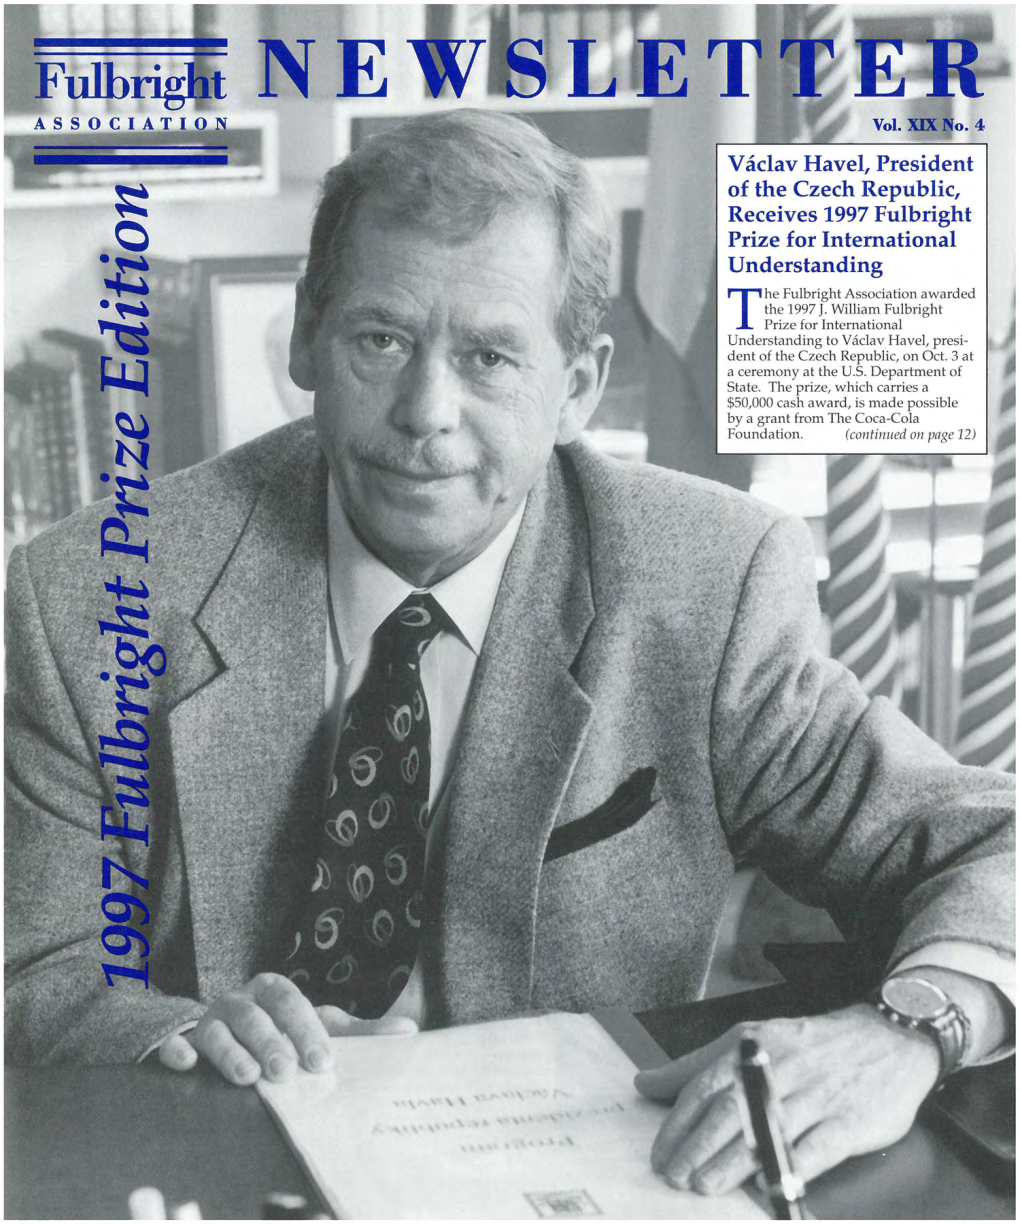 Vaclav Havel, President of the Czech Republic, Receives 1997 Fulbright Prize for International Understanding He Fulbright Association Awarded the 1997 J